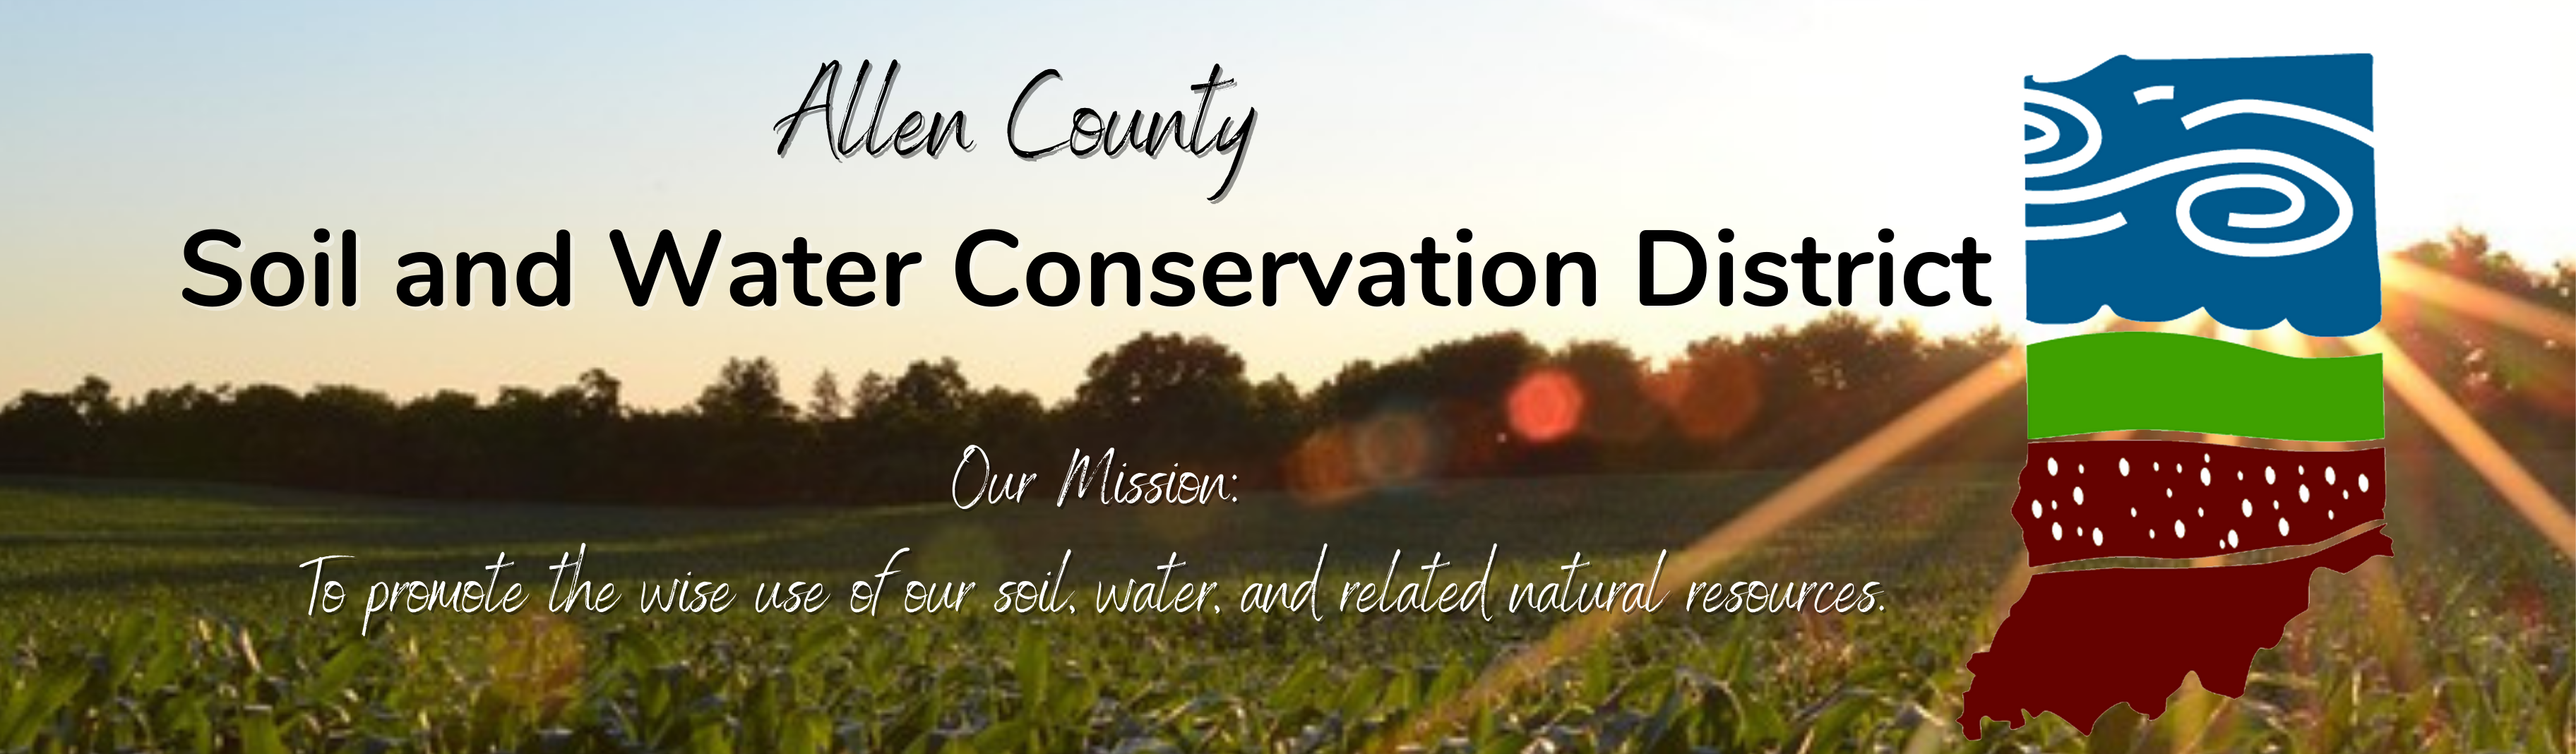 Allen County Soil and Water Conservation District